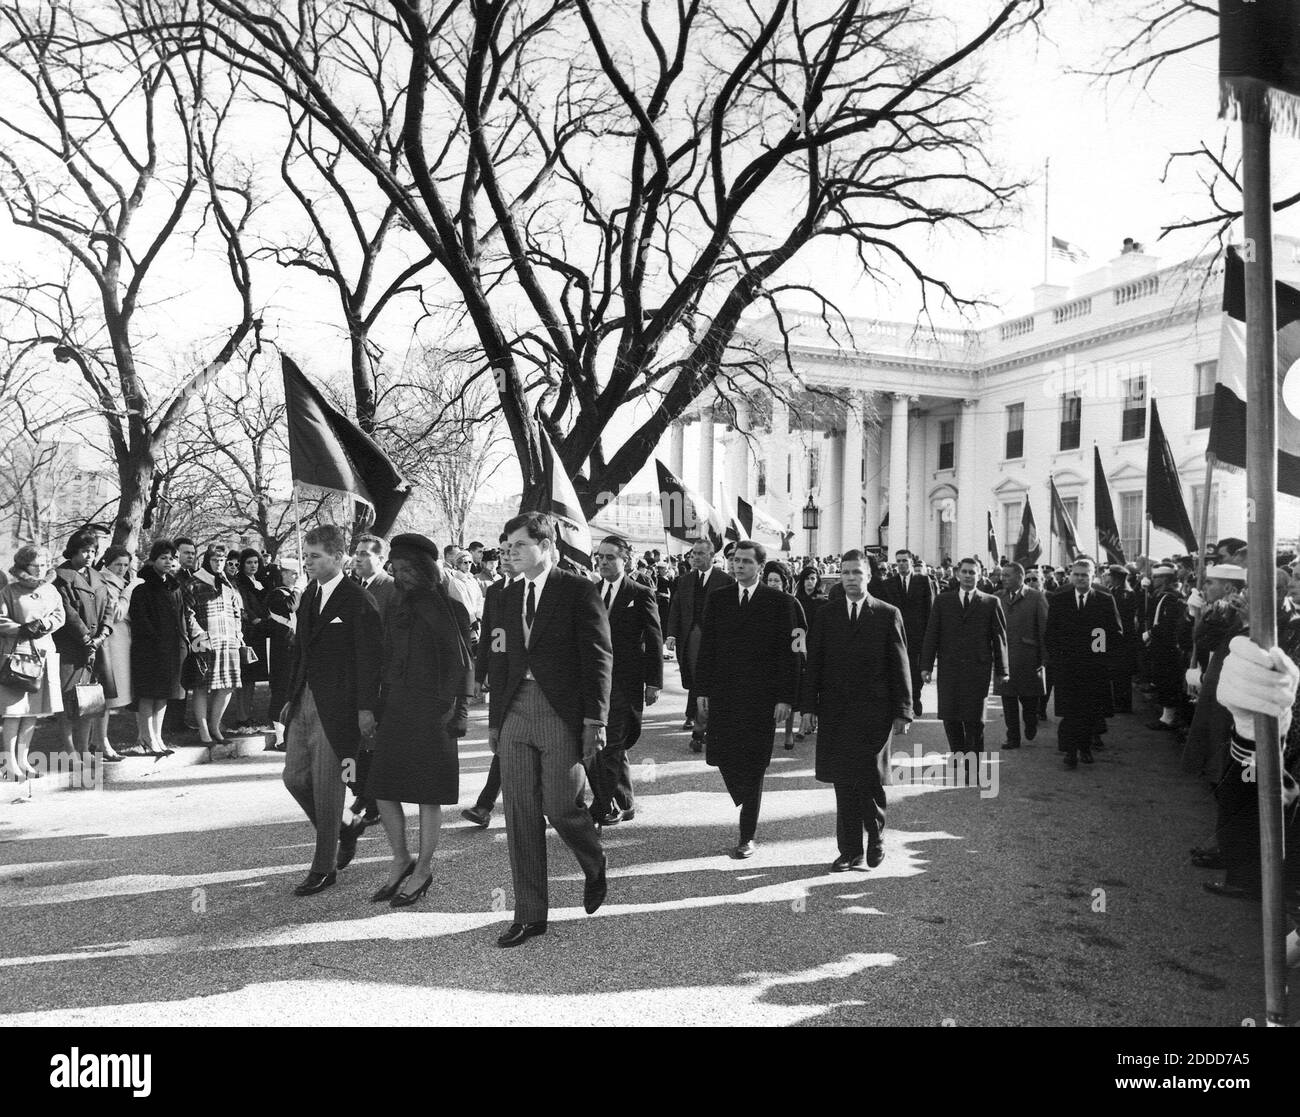 NO FILM, NO VIDEO, NO TV, NO DOCUMENTARY - The procession to St. Matthews Cathedral for the funeral of President John F. Kennedy leaves the White House in Washington, D.C., on Nov. 25, 1963. First Row, L-R: Attorney General Robert F. Kennedy, Jacqueline Kennedy, Senator Edward M. Kennedy; Second Row: James Auchincloss, R. Sargent Shriver and Steven Smith; Third Row: Mrs. Lady Bird Johnson, President Johnson and Luci Baines Johnson. Photo by Abbie Rowe/National Park Service/John F. Kennedy Presidential Library and Museum/MCT/ABACAPRESS.COM Stock Photo